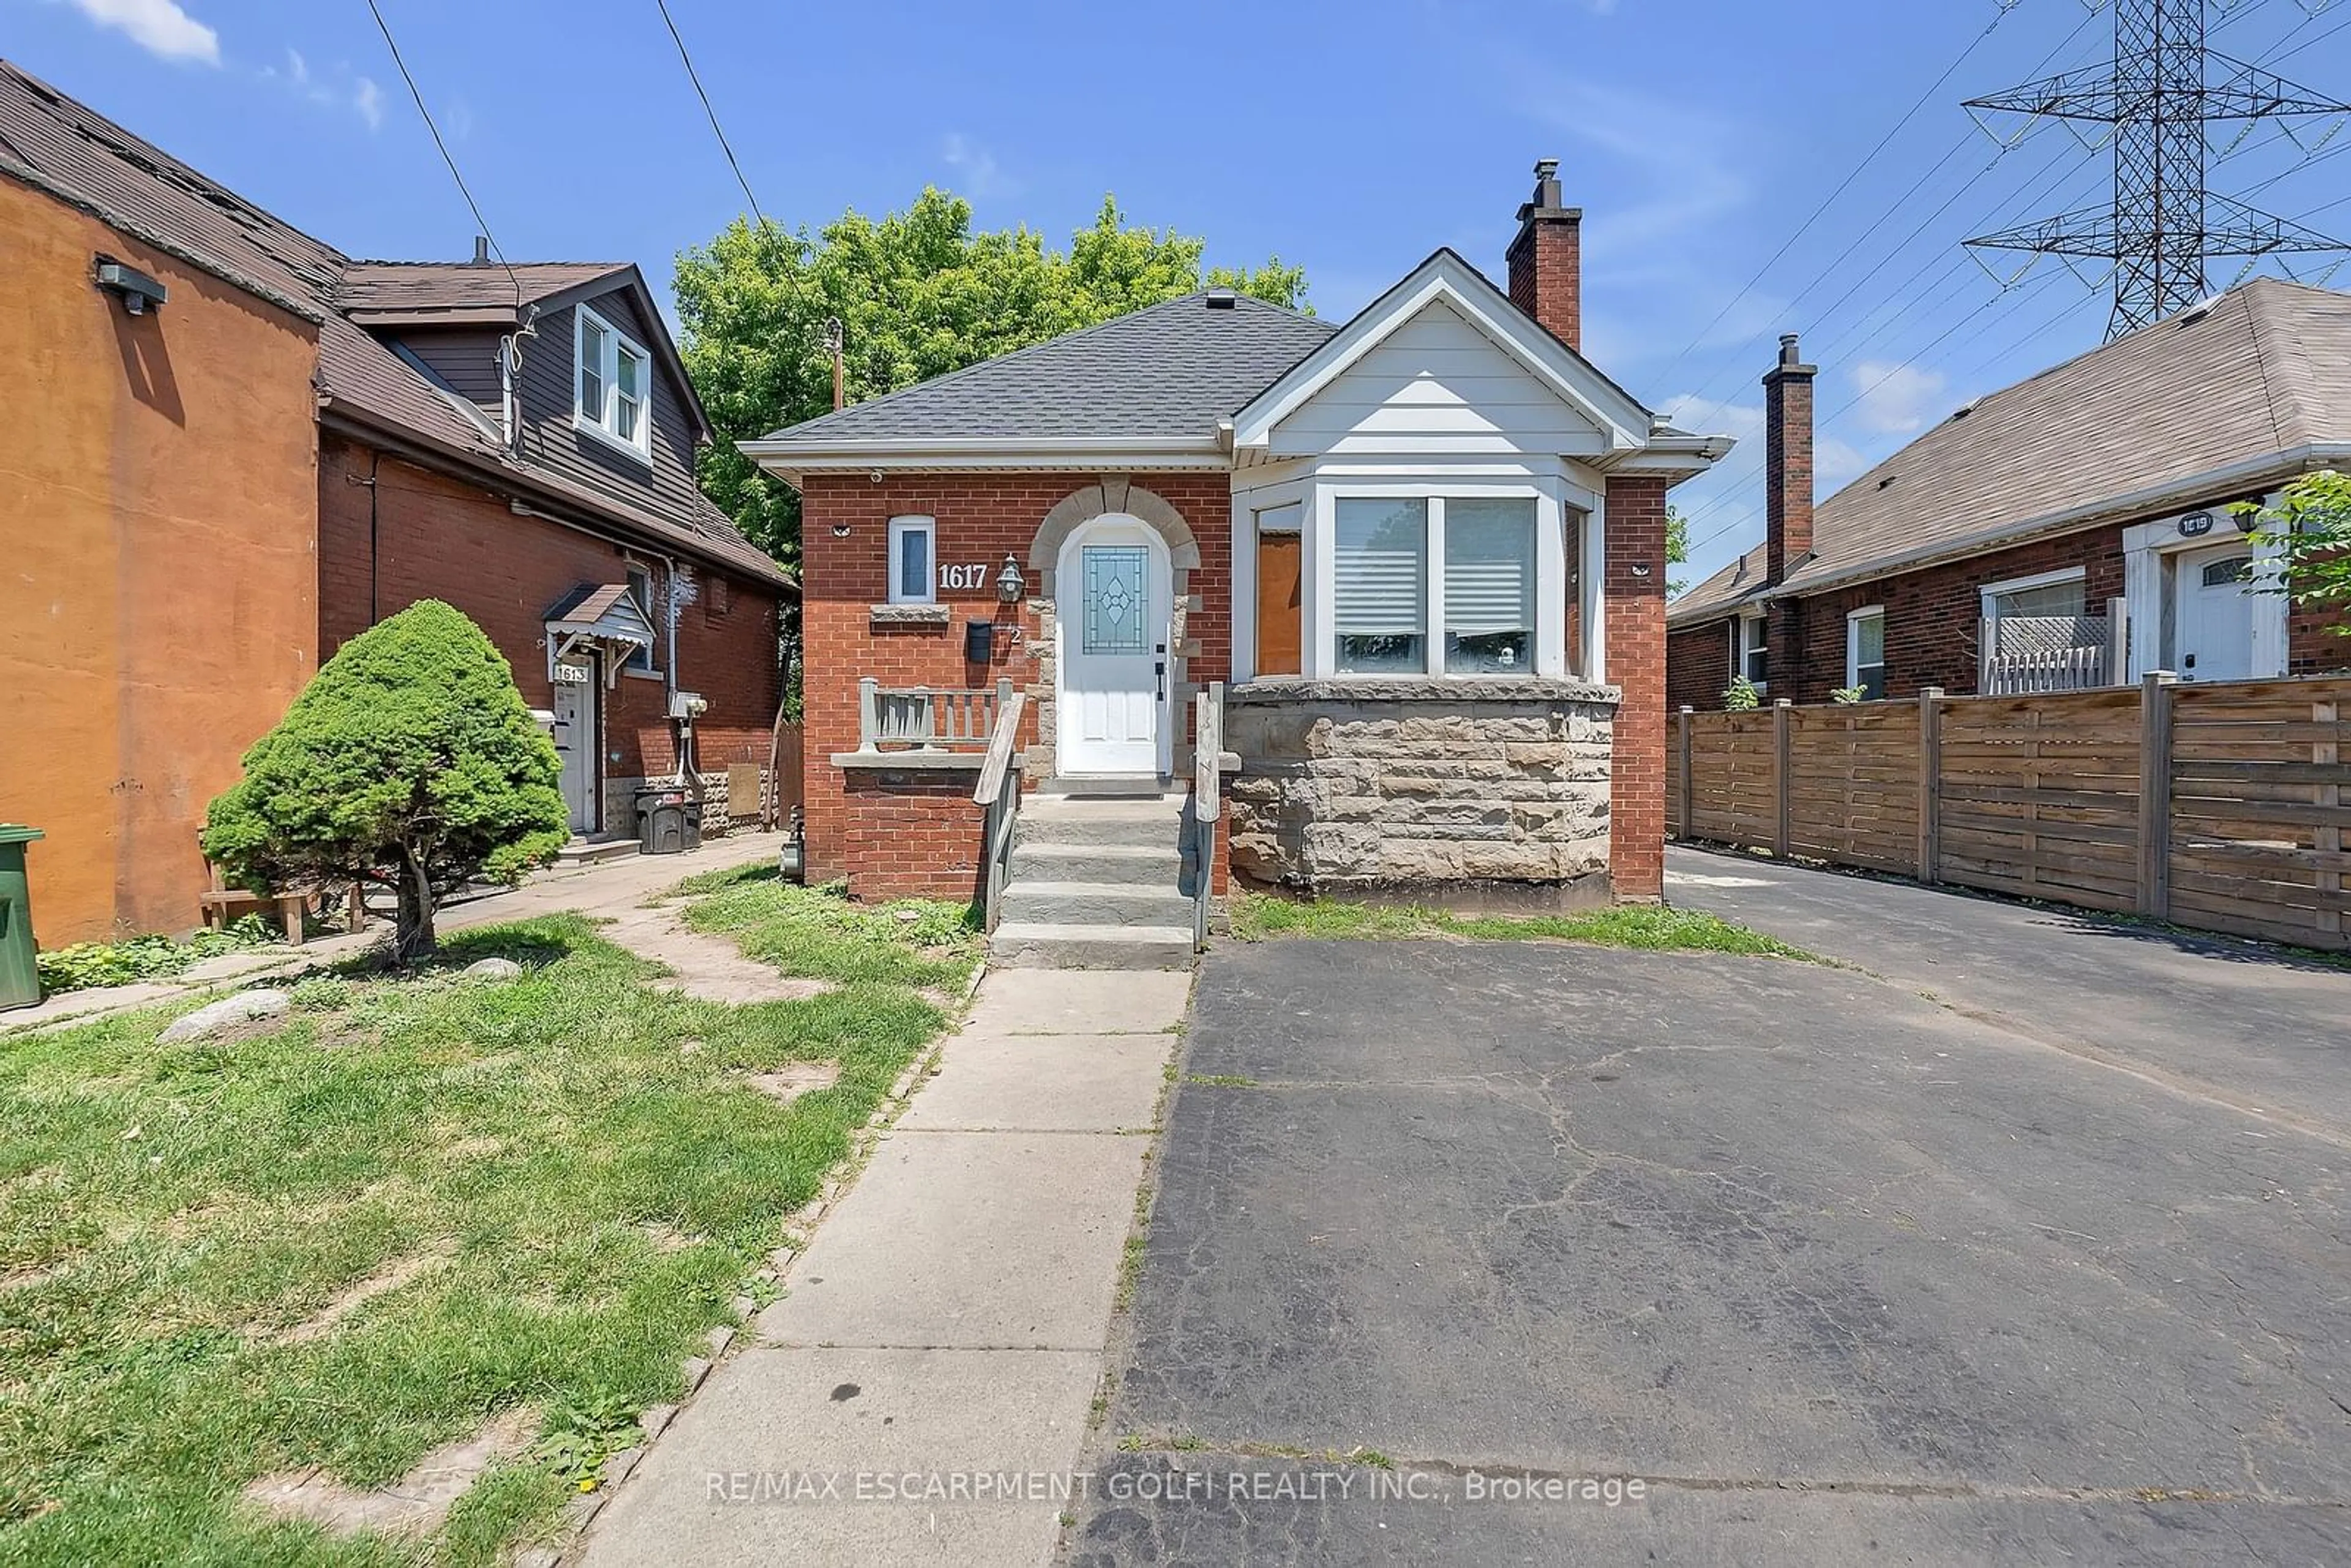 Frontside or backside of a home for 1617 Main St, Hamilton Ontario L8H 1C4